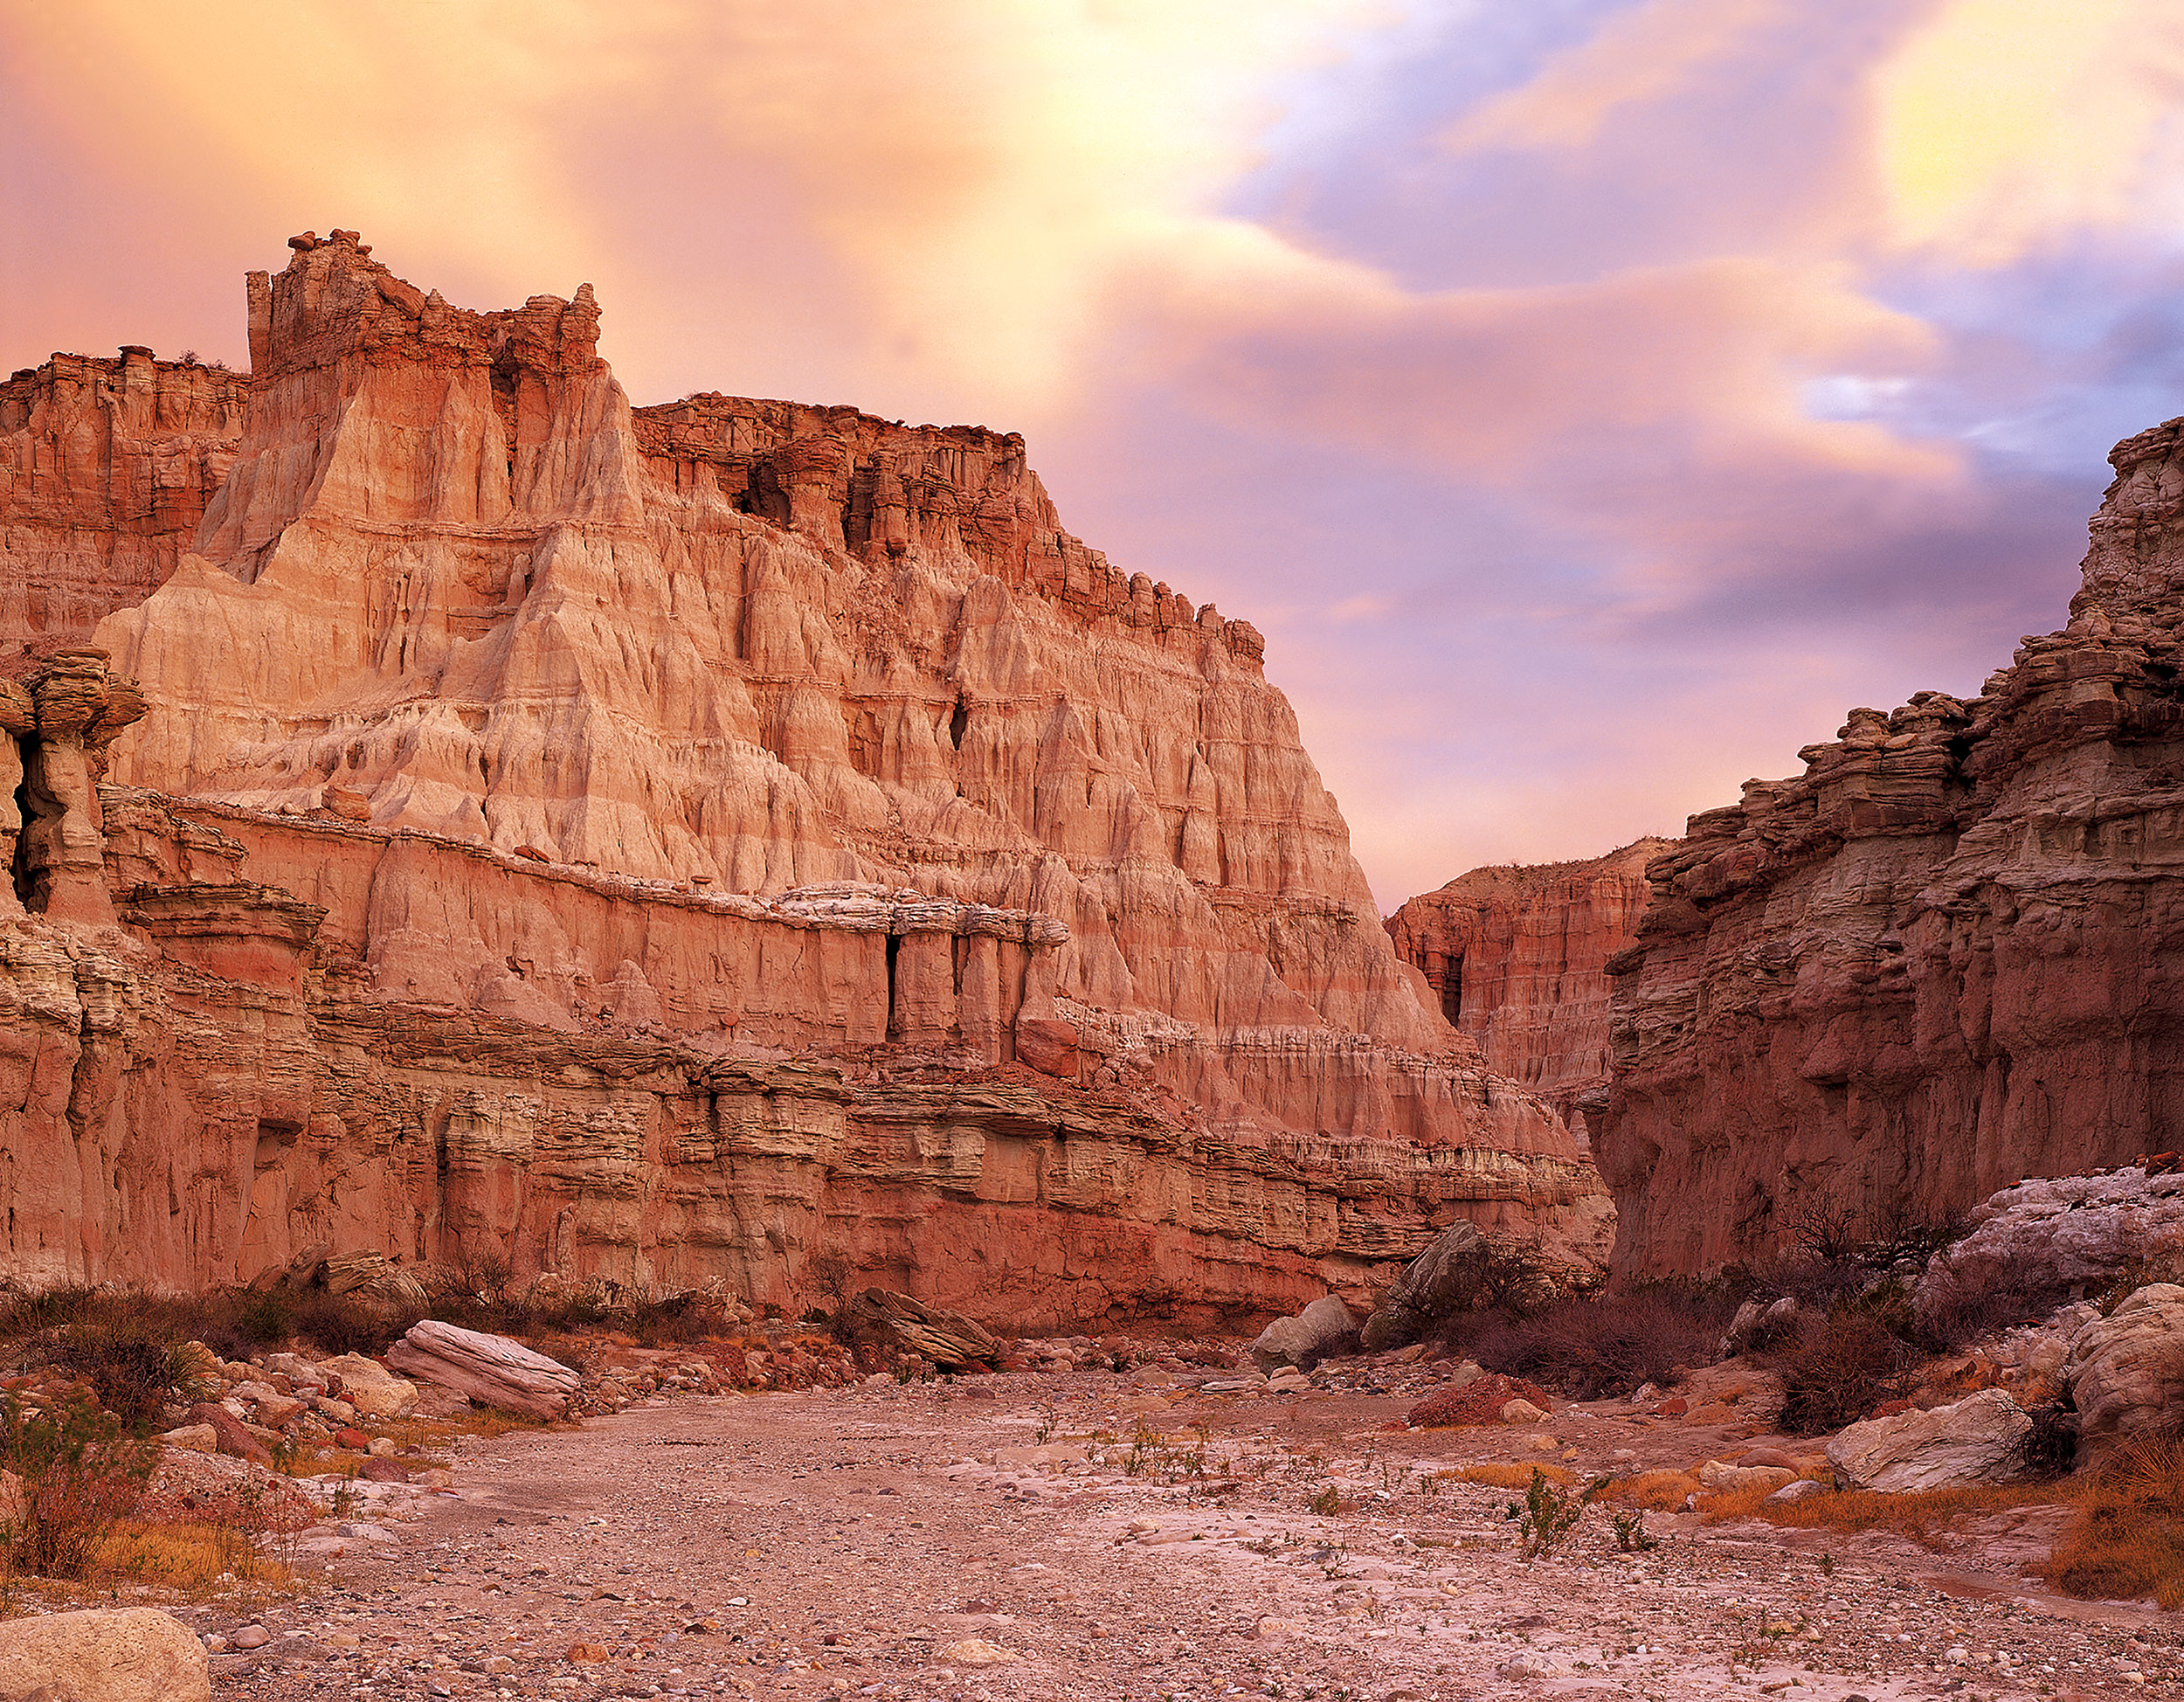  Red Canyon at Sunrise